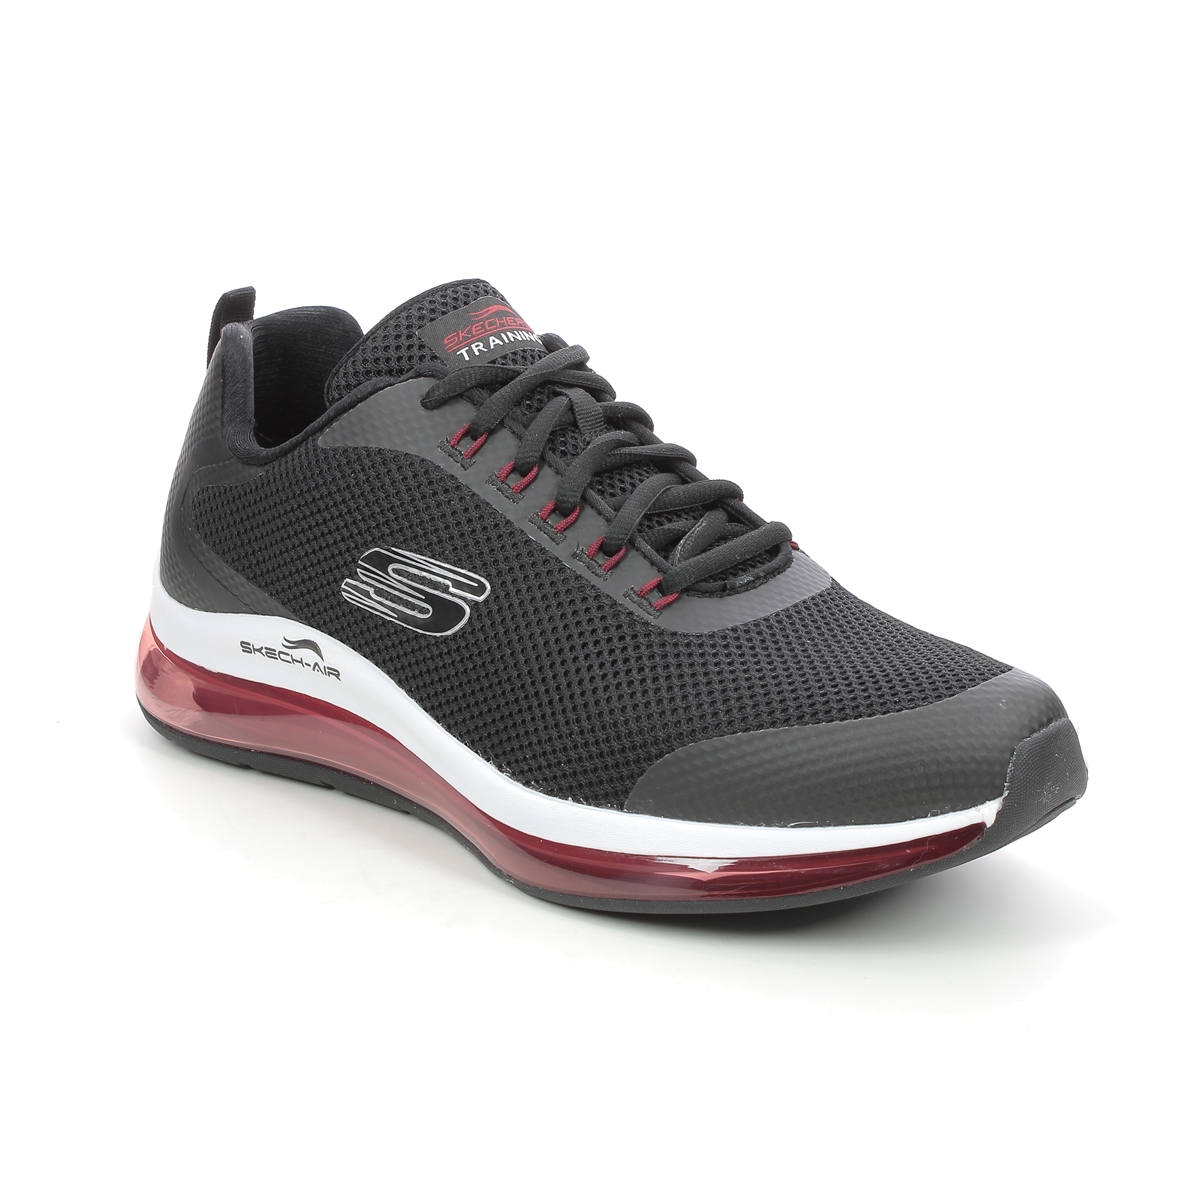 Skechers Skech Air 2 Mens Black Red Mens Trainers 232036 In Size 10 In Plain Black Red